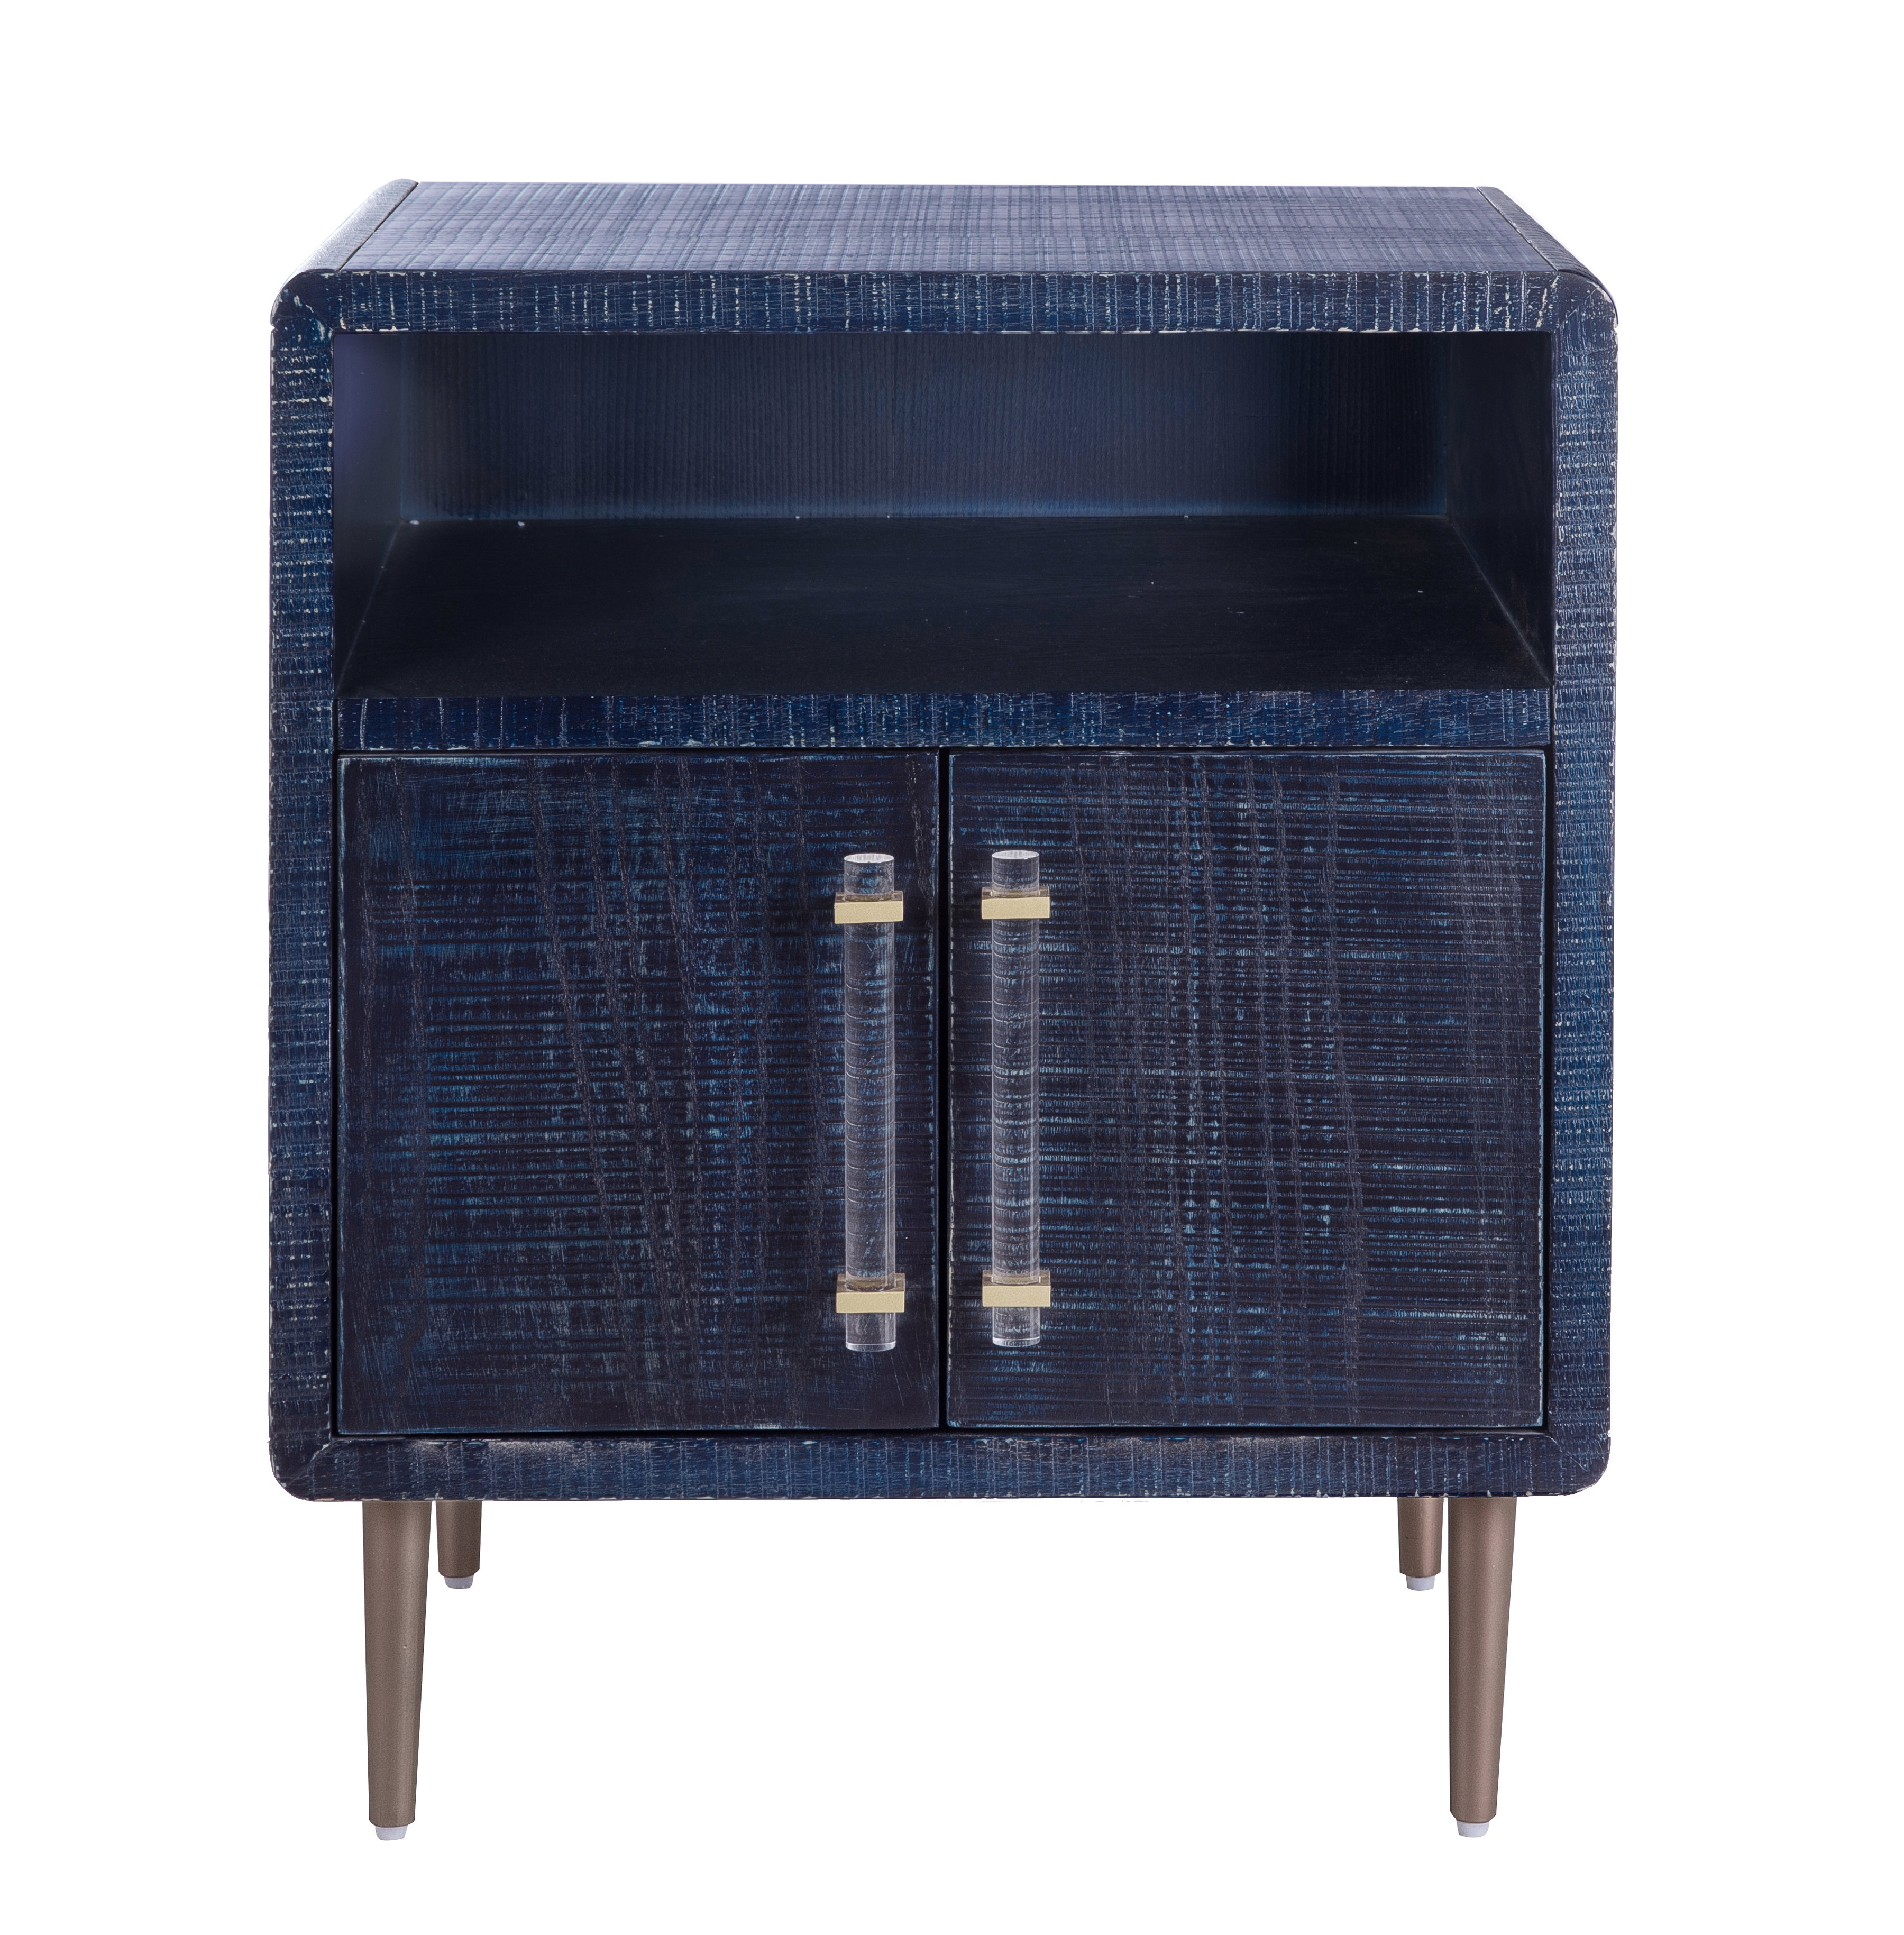 TOV Furniture Marco Textured Indigo Finish Side Table with Brass Legs - image 1 of 9